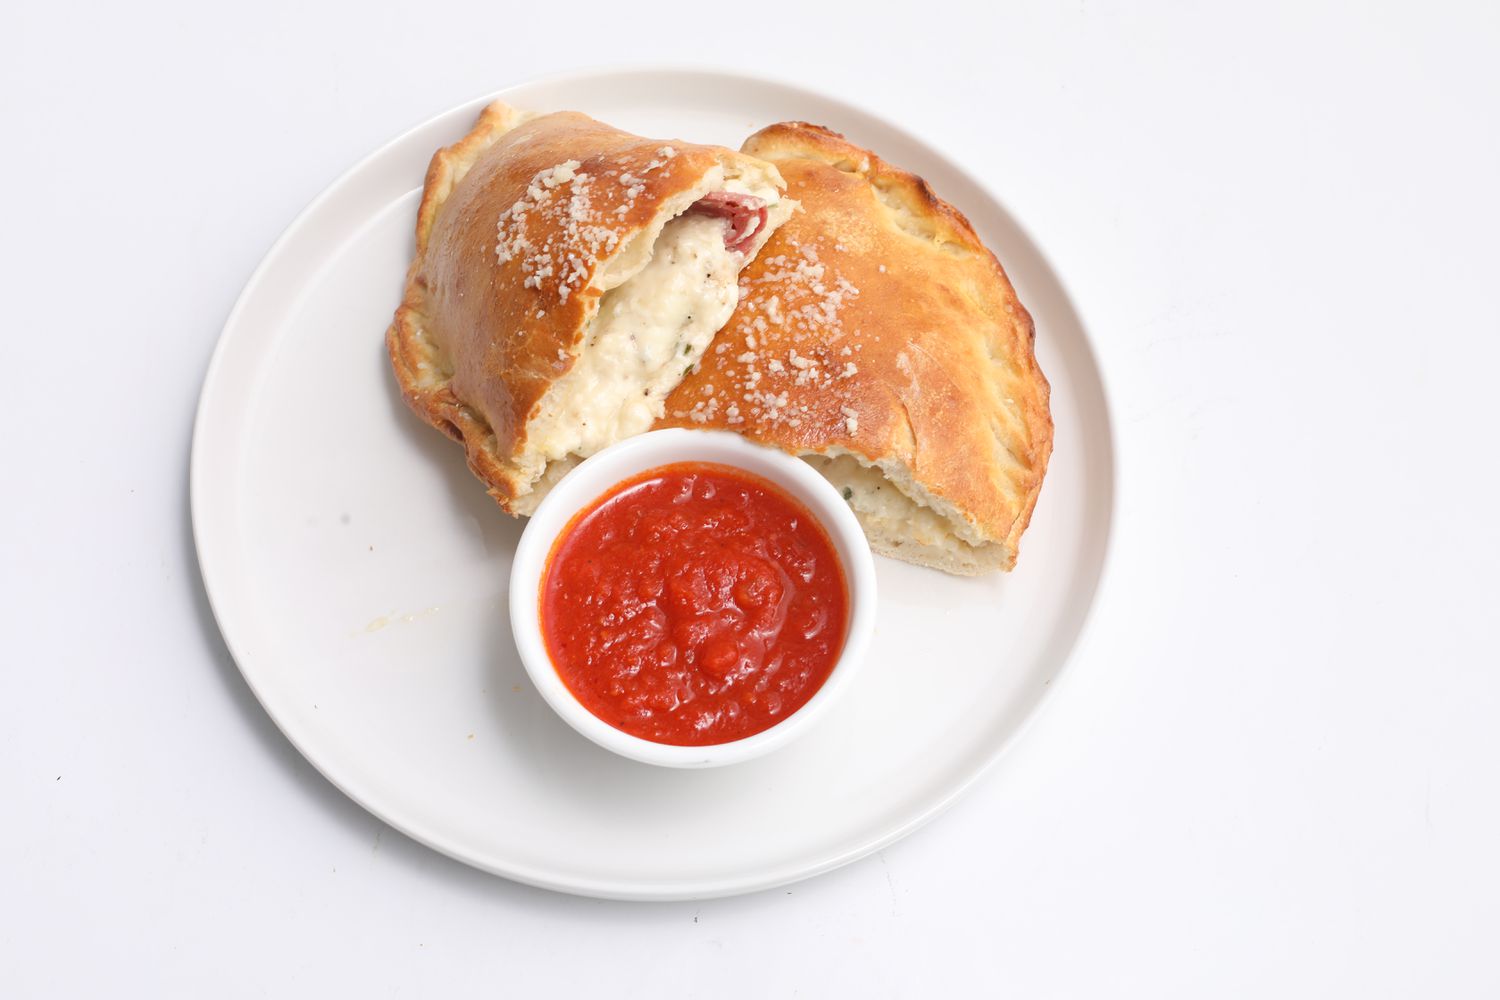 A golden brown calzone cut in half with tomato sauce on the side